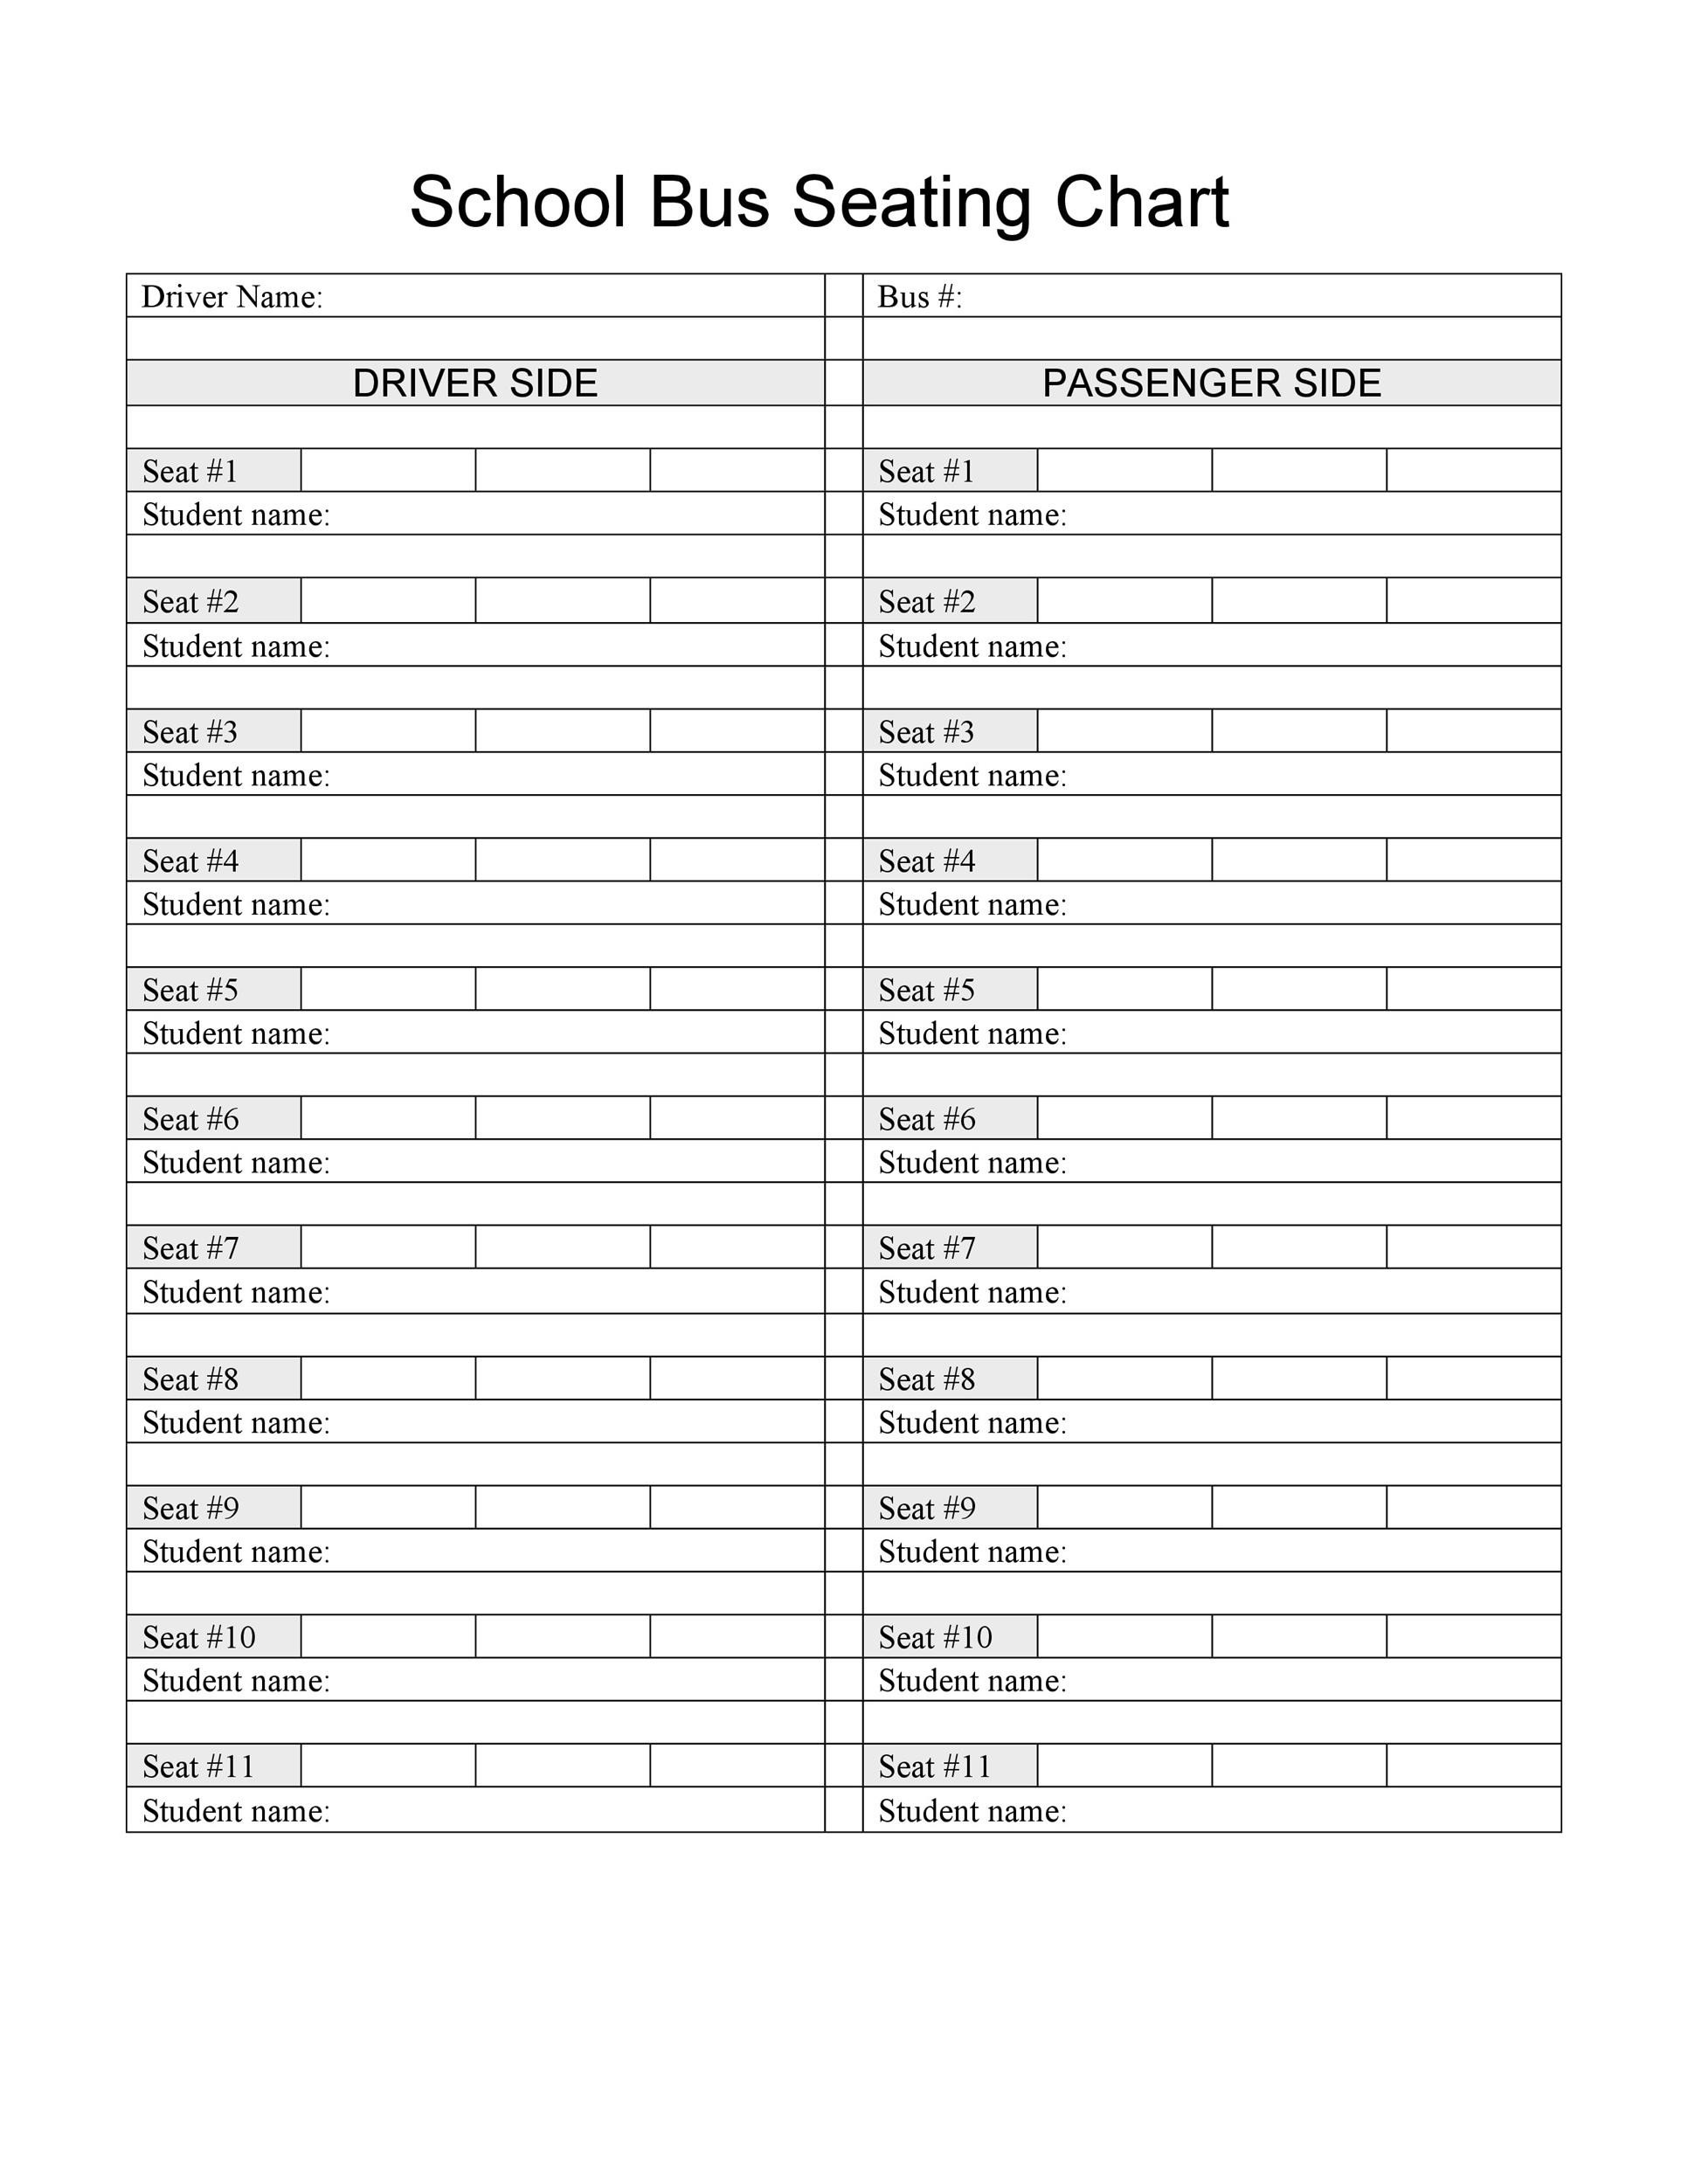 School Bus Seating Chart Template Excel Elcho Table